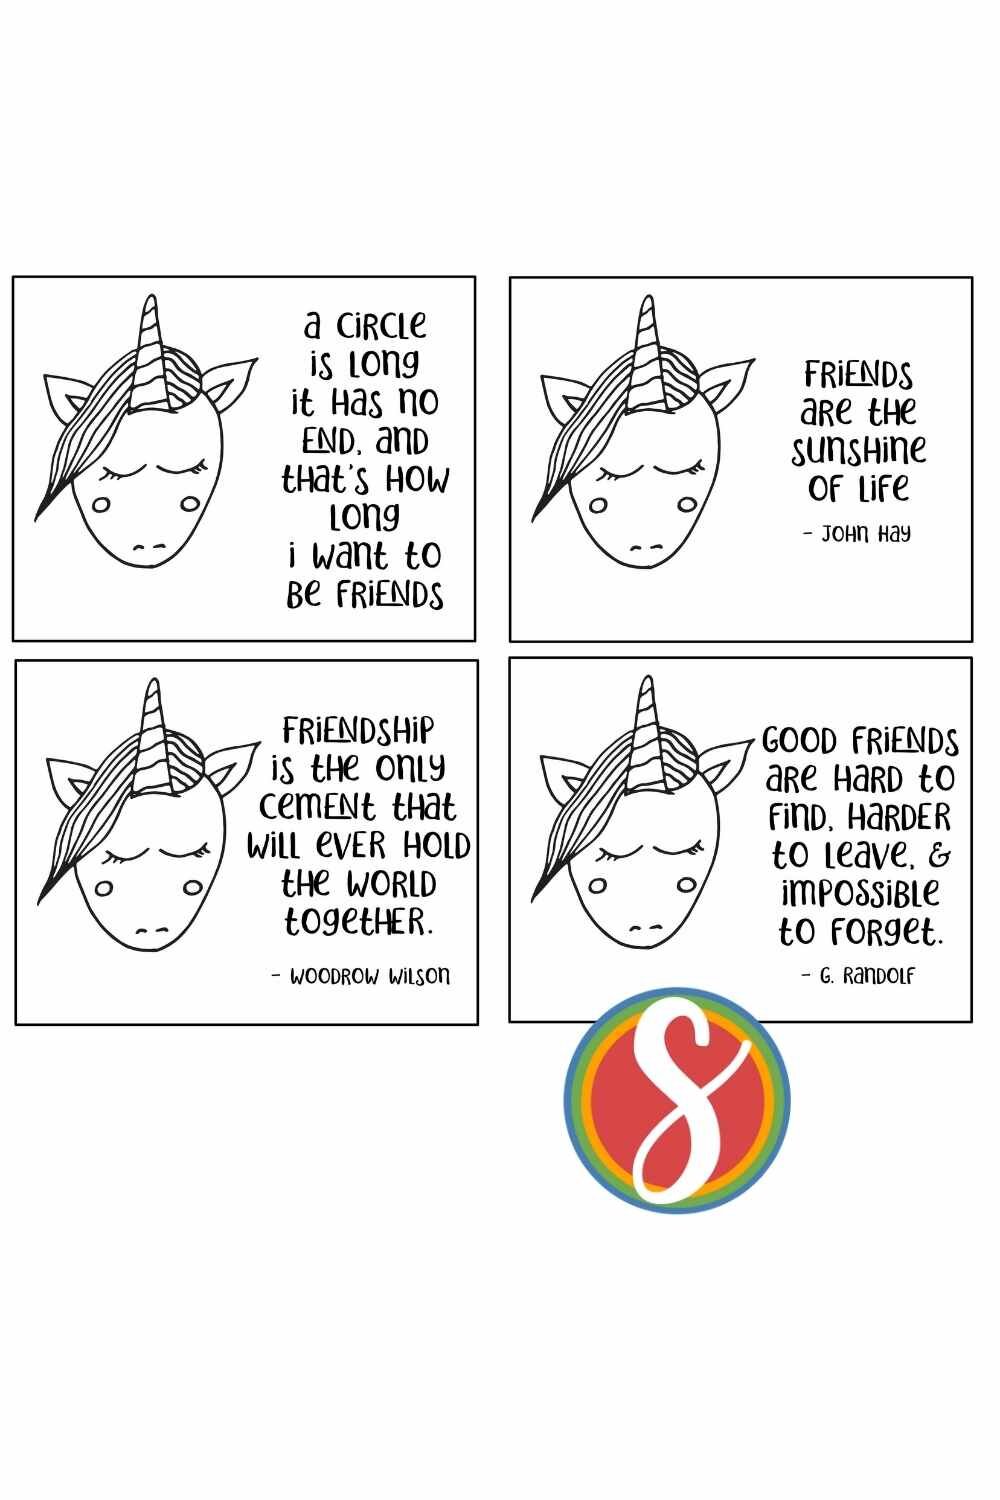 Friendship coloring cards with unicorns and quotes about friends - are to print and color from Stevie Doodles